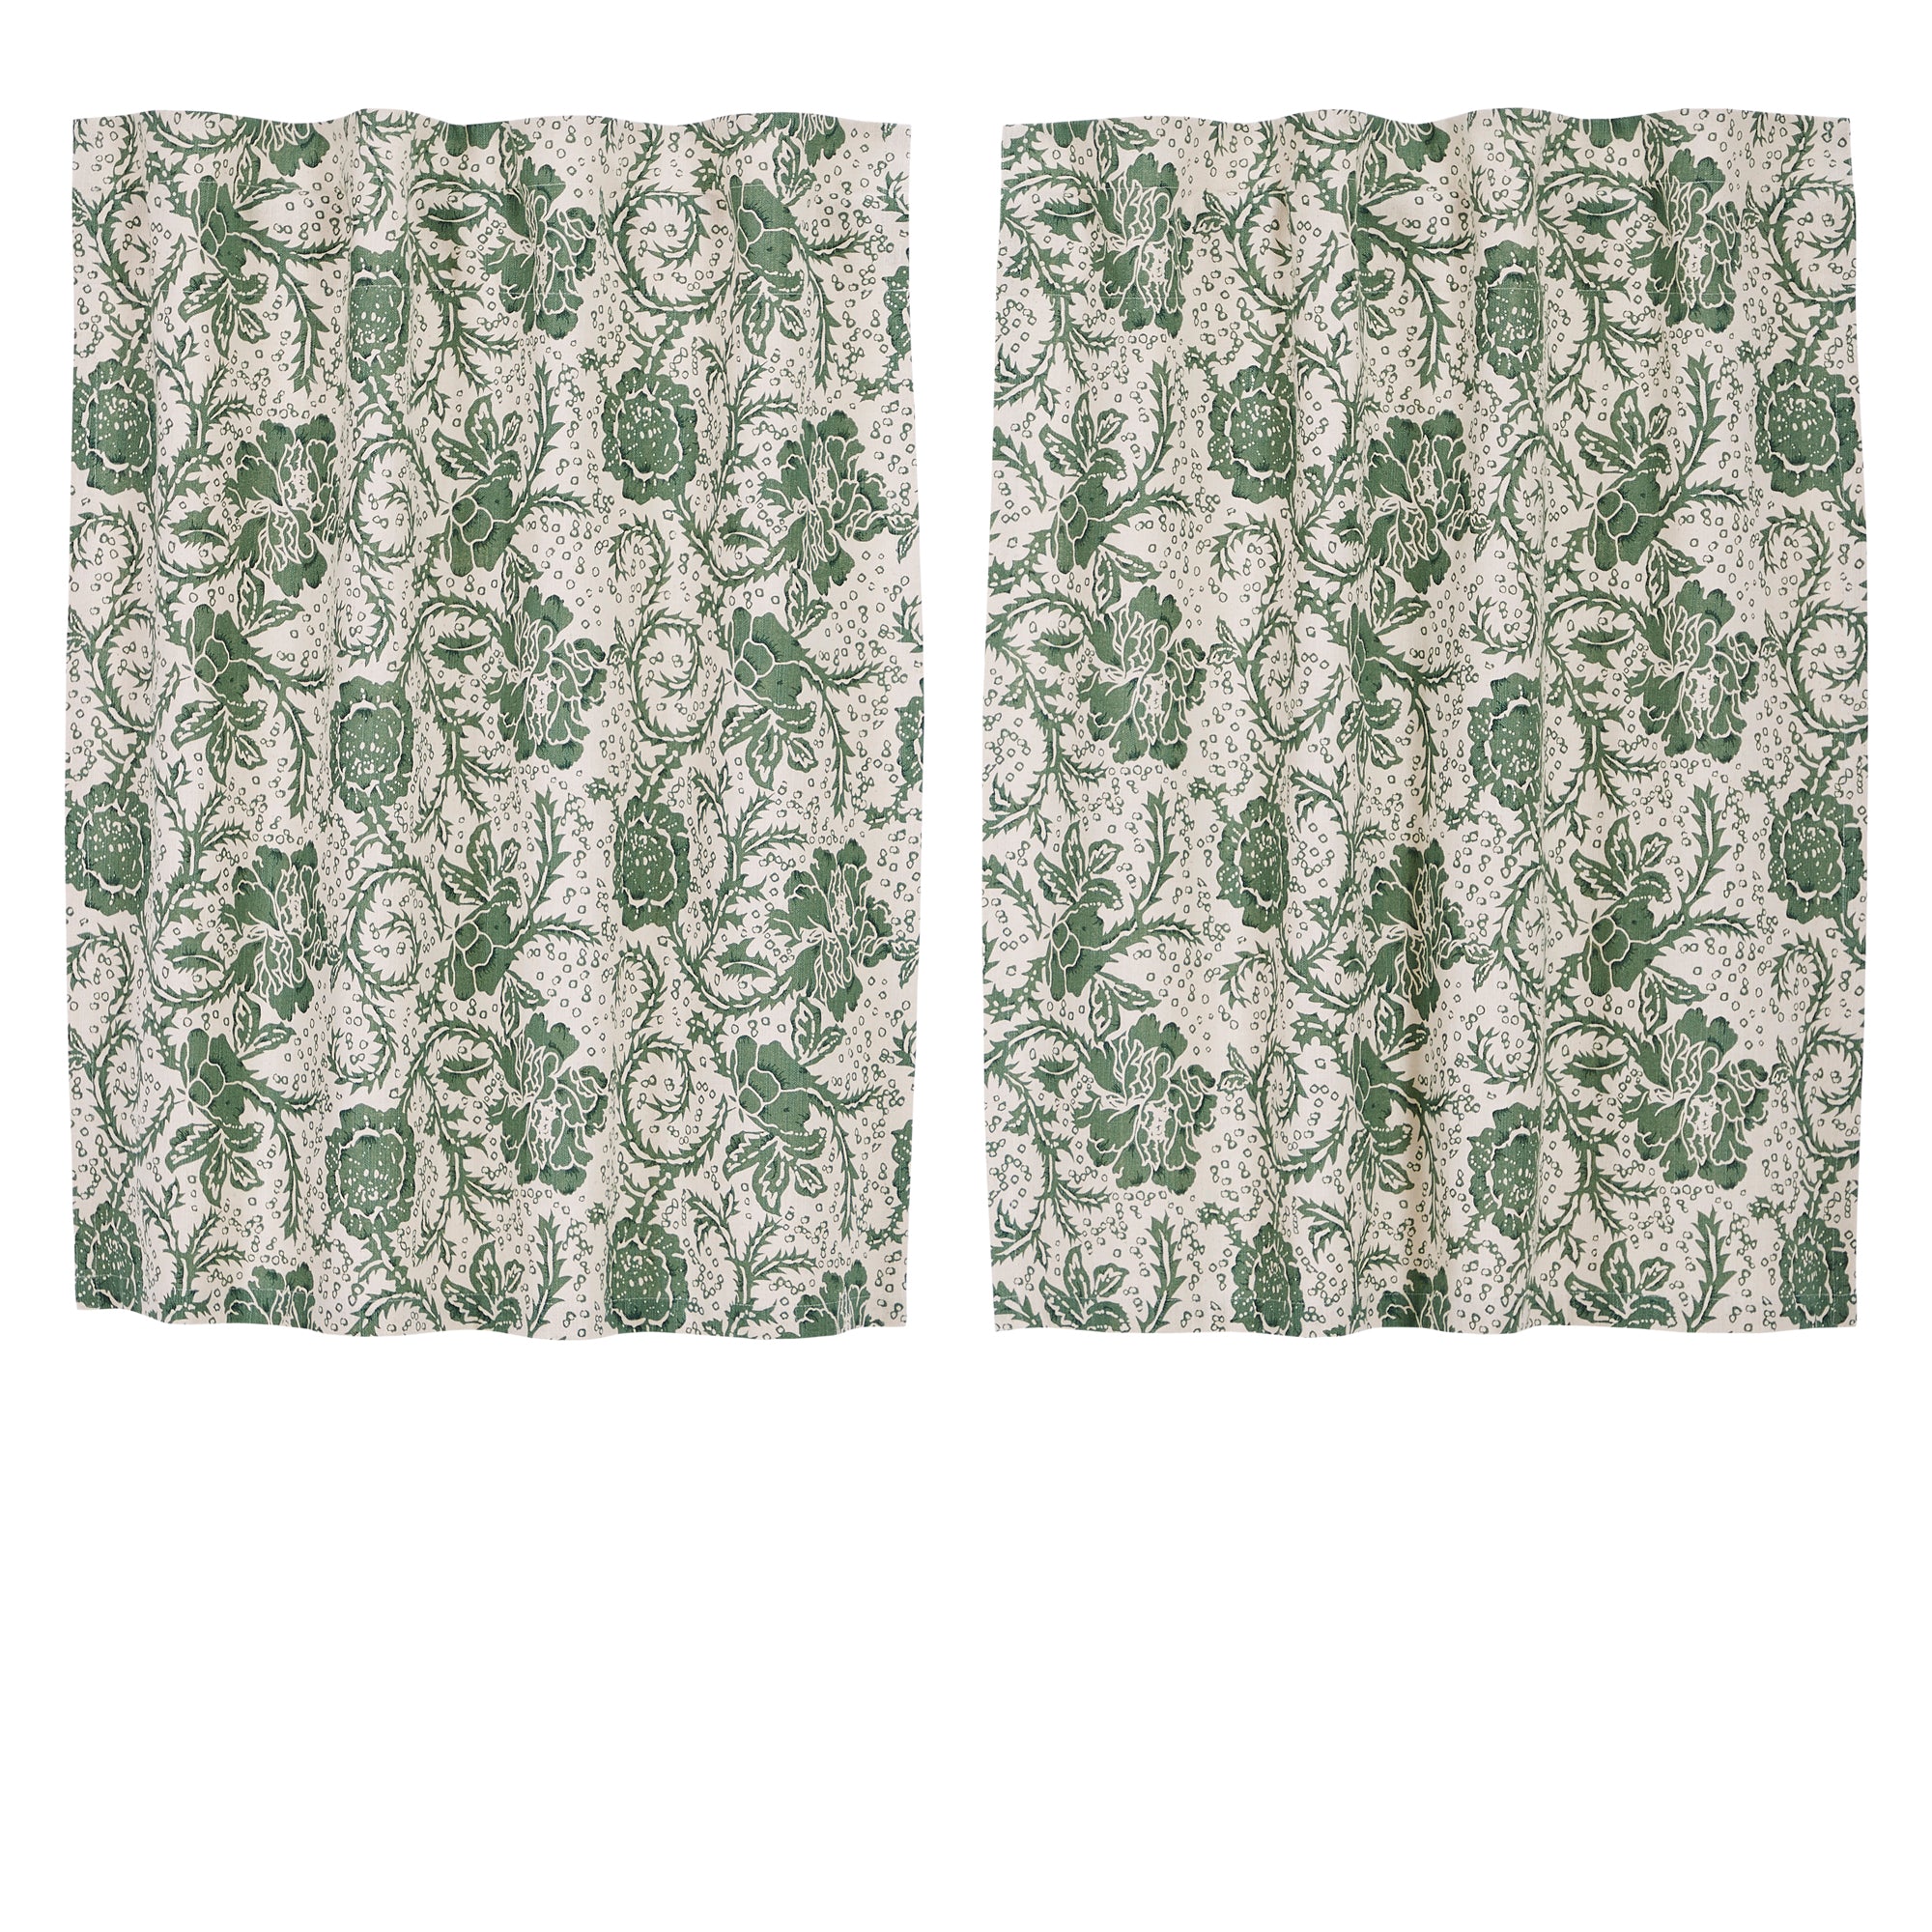 April & Olive Dorset Green Floral Tier Set of 2 L36xW36 By VHC Brands